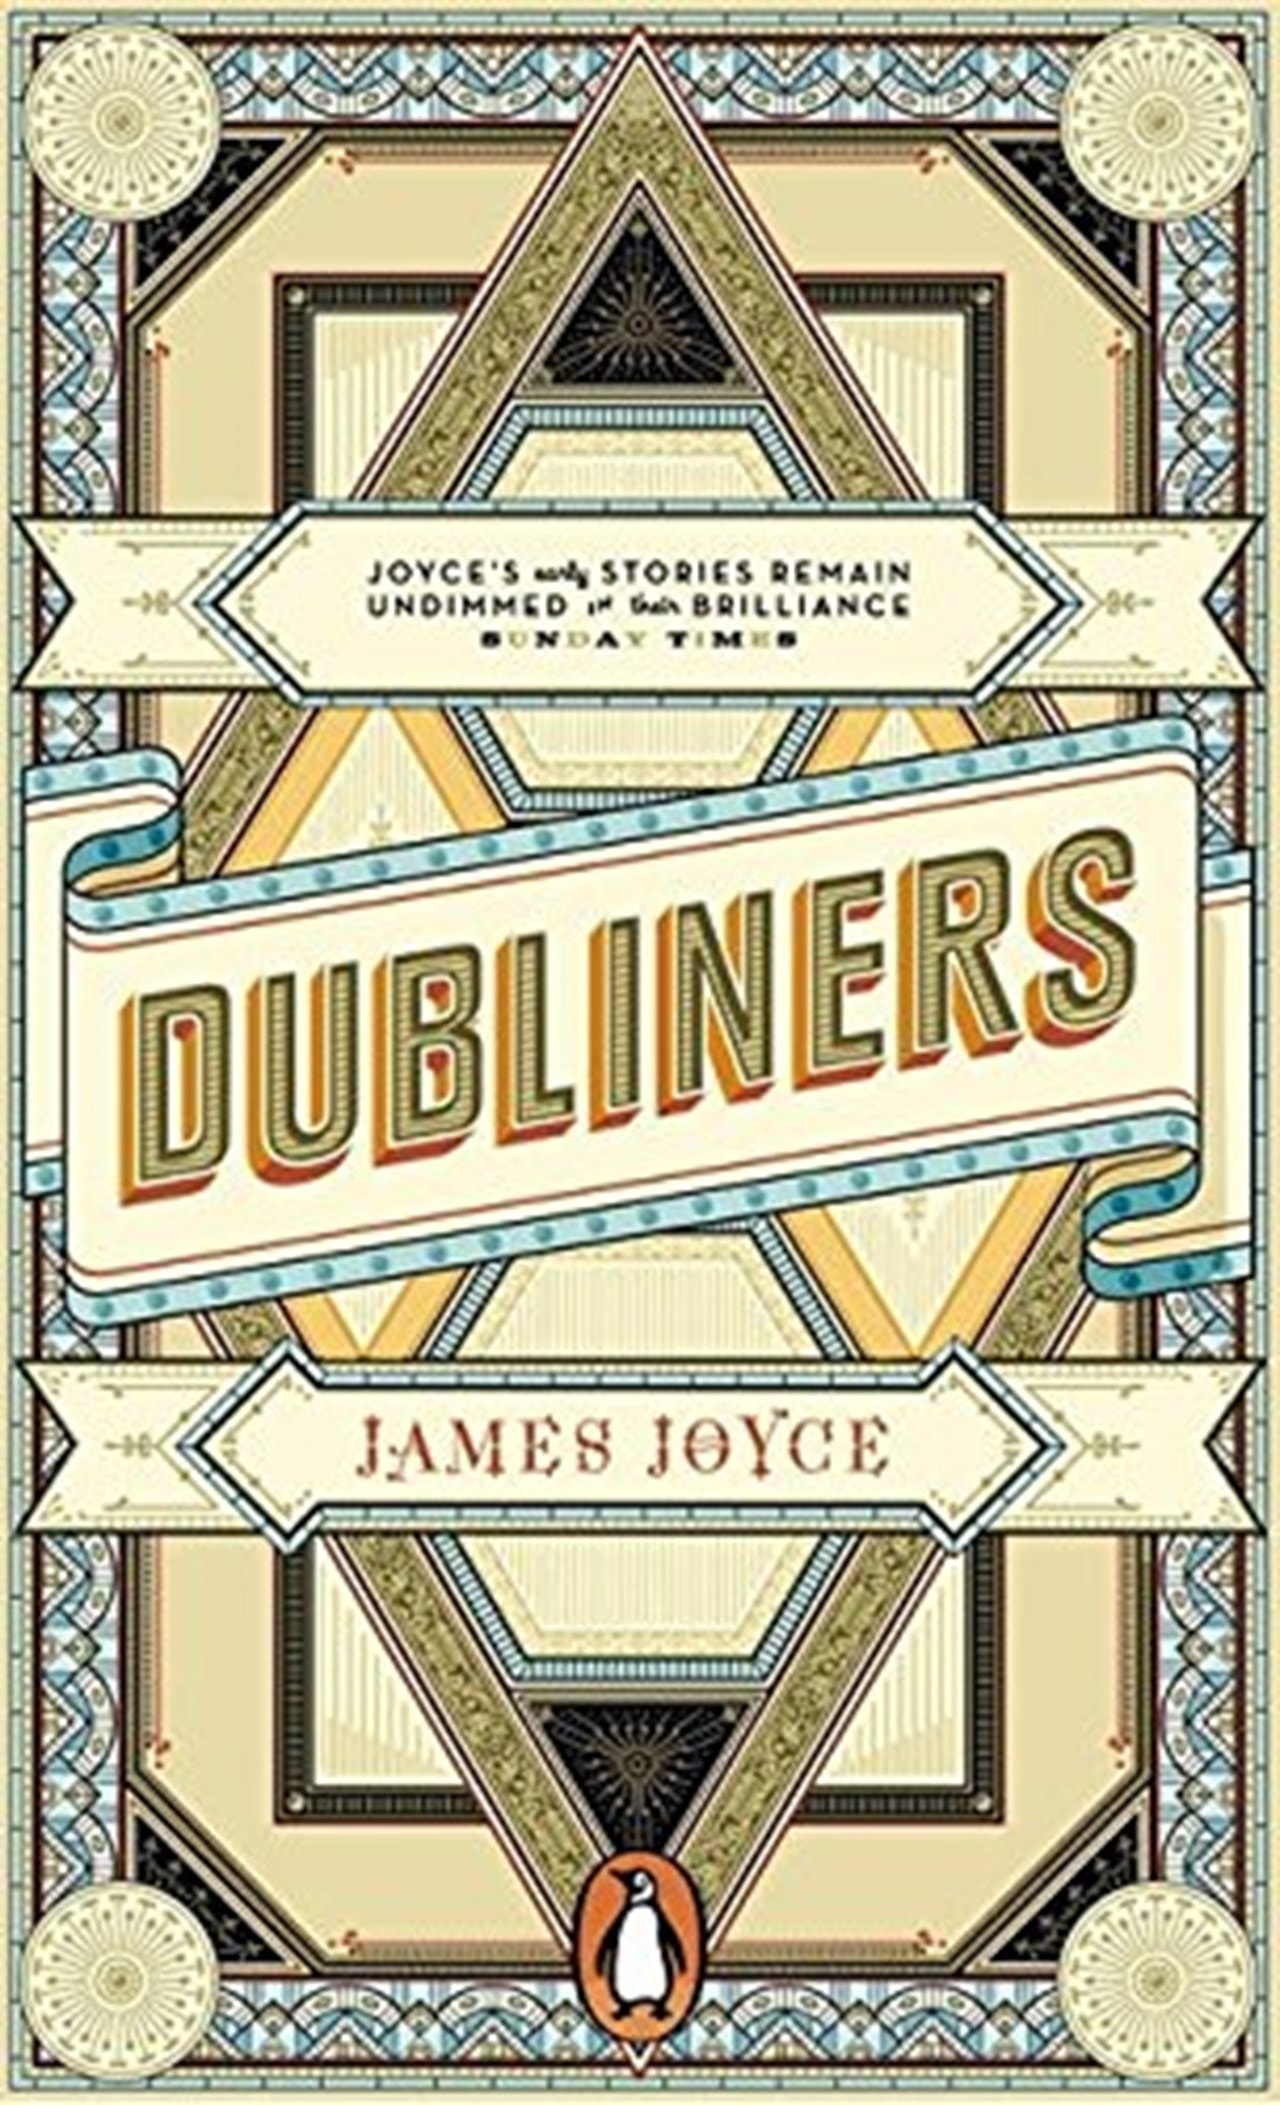 dubliners book